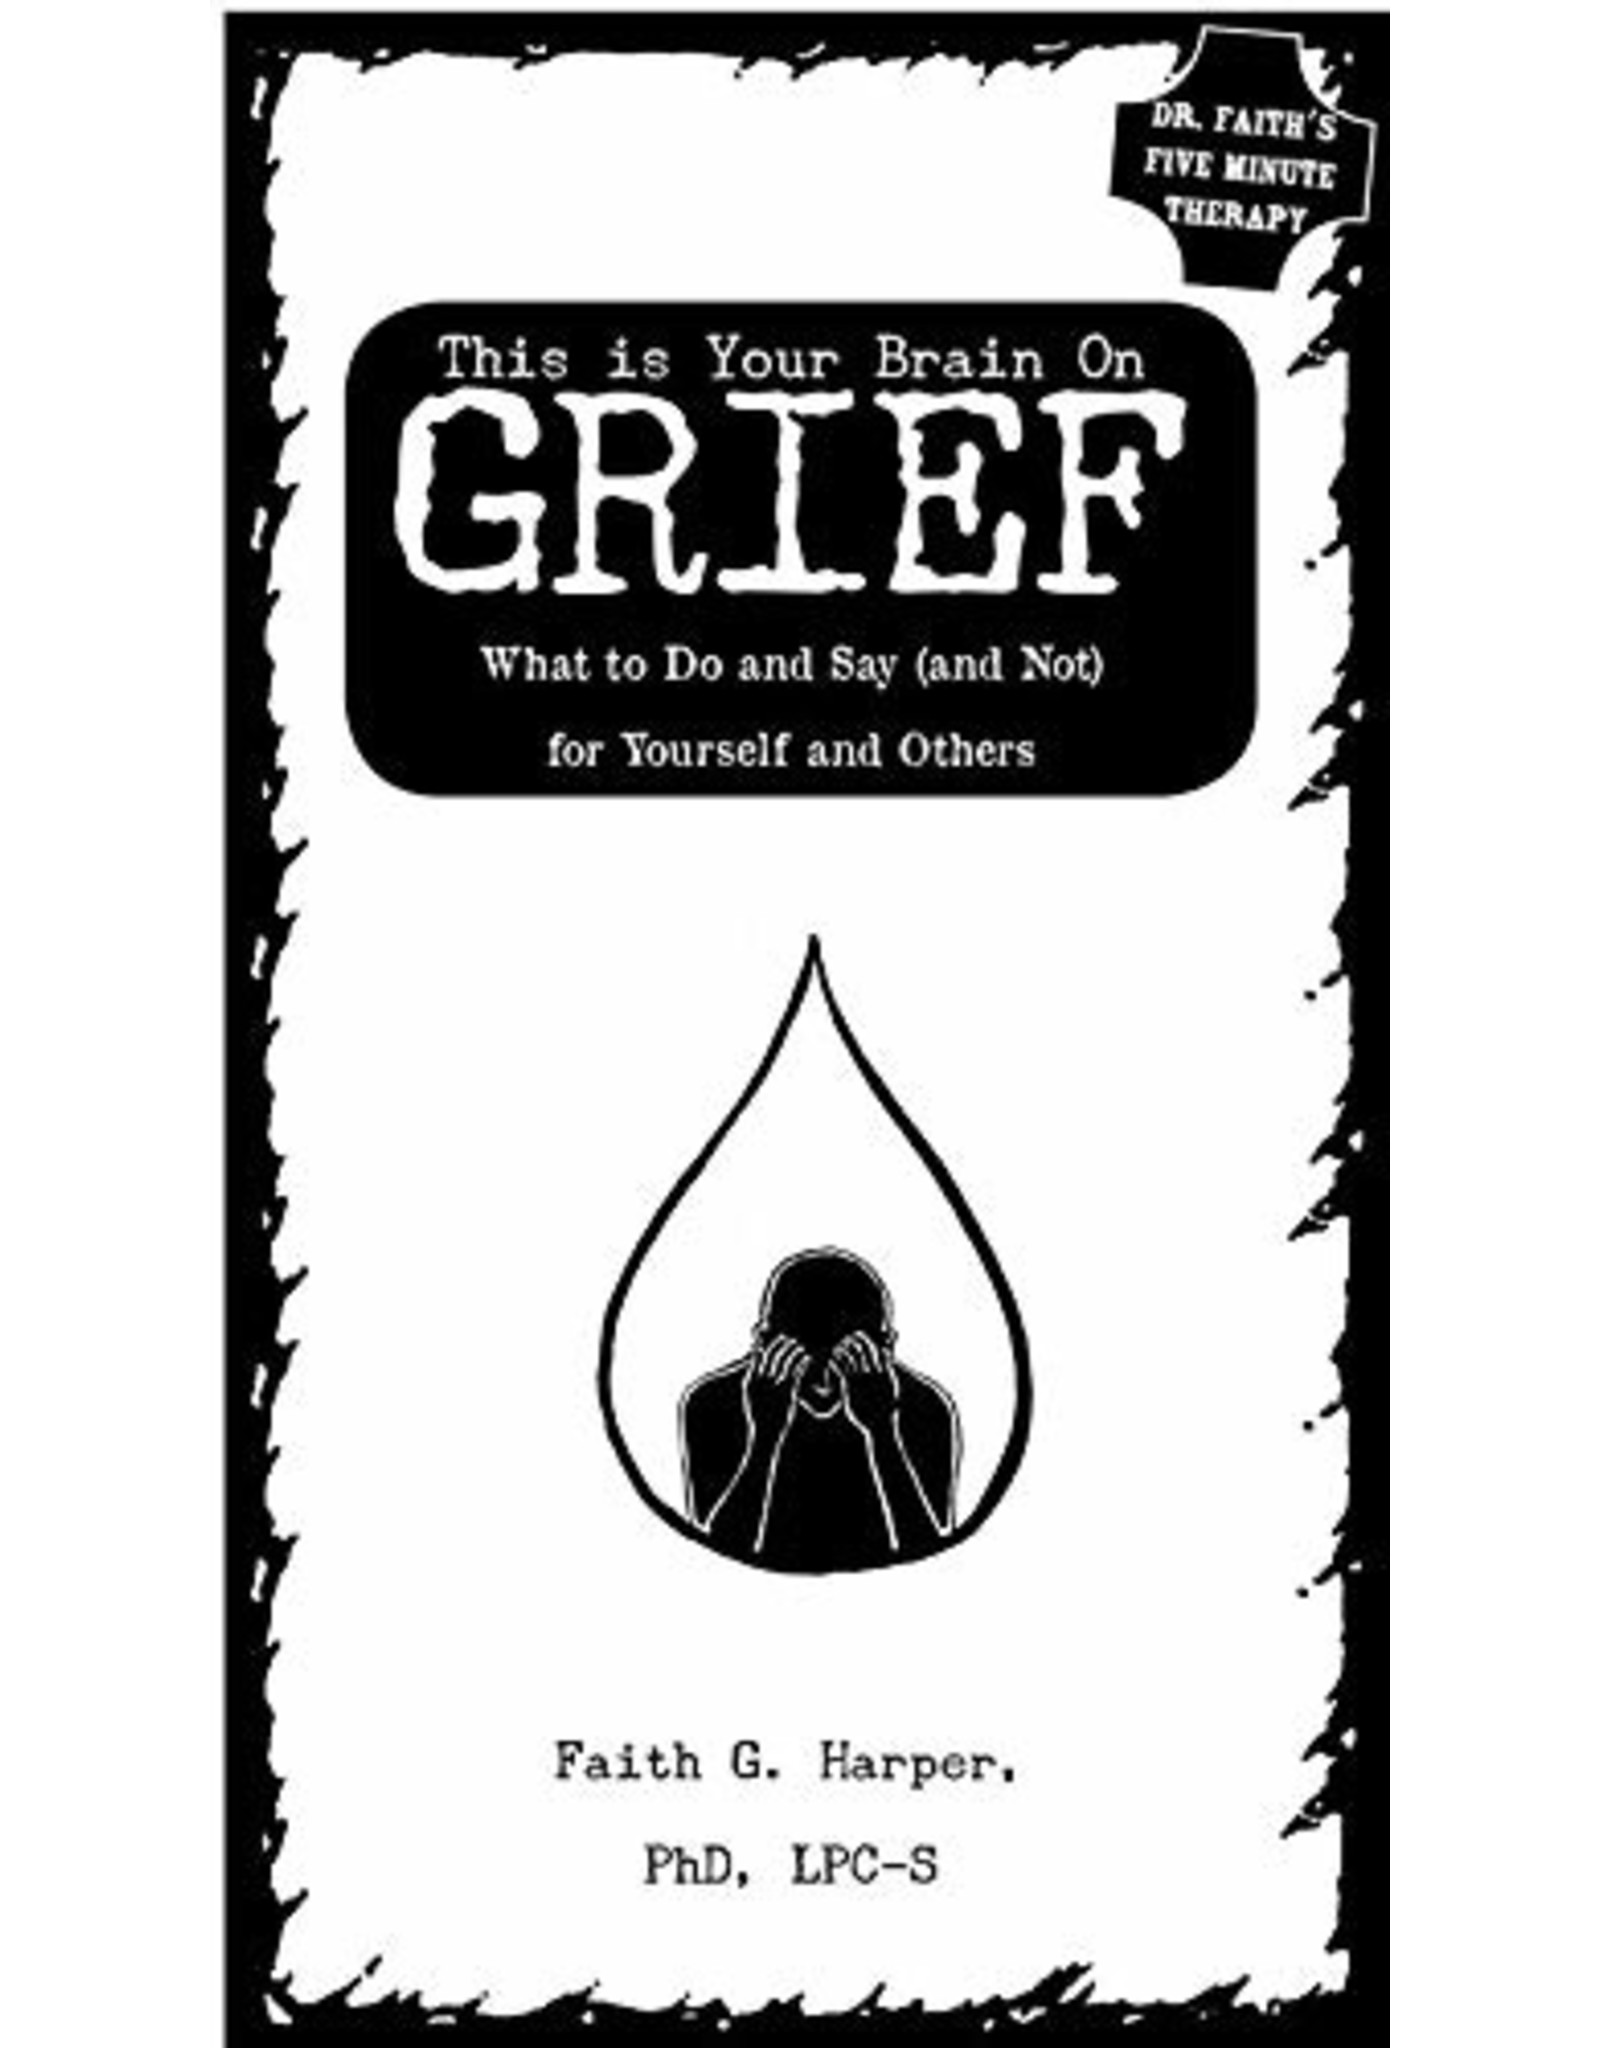 Literature This is Your Brain on Grief: What to Do and Say (and Not) for Yourself and Others